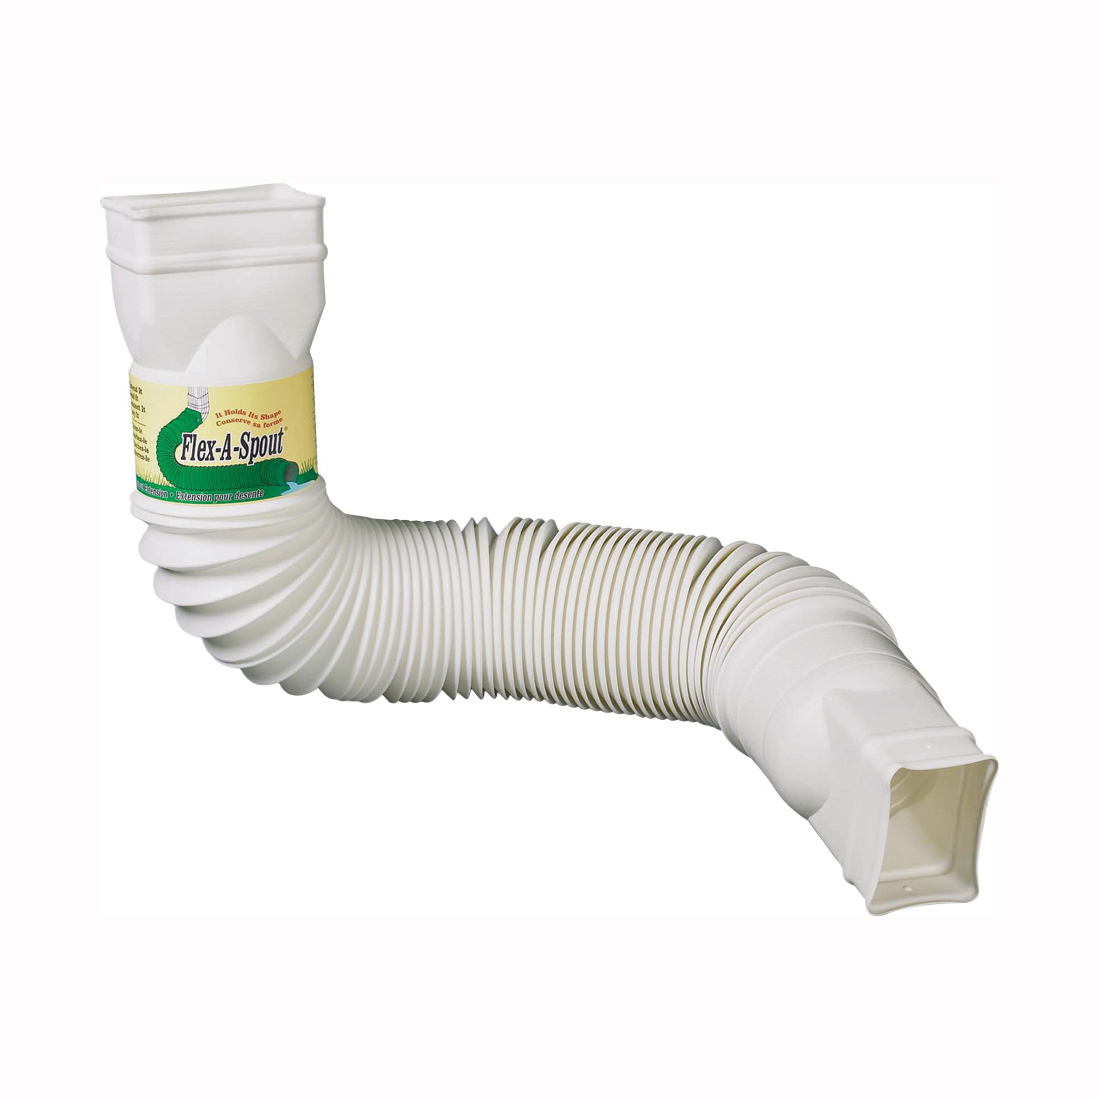 Amerimax Flex-A-Spout 85510 Downspout Extension, 22 to 55 in L Extended, Vinyl, White - 1